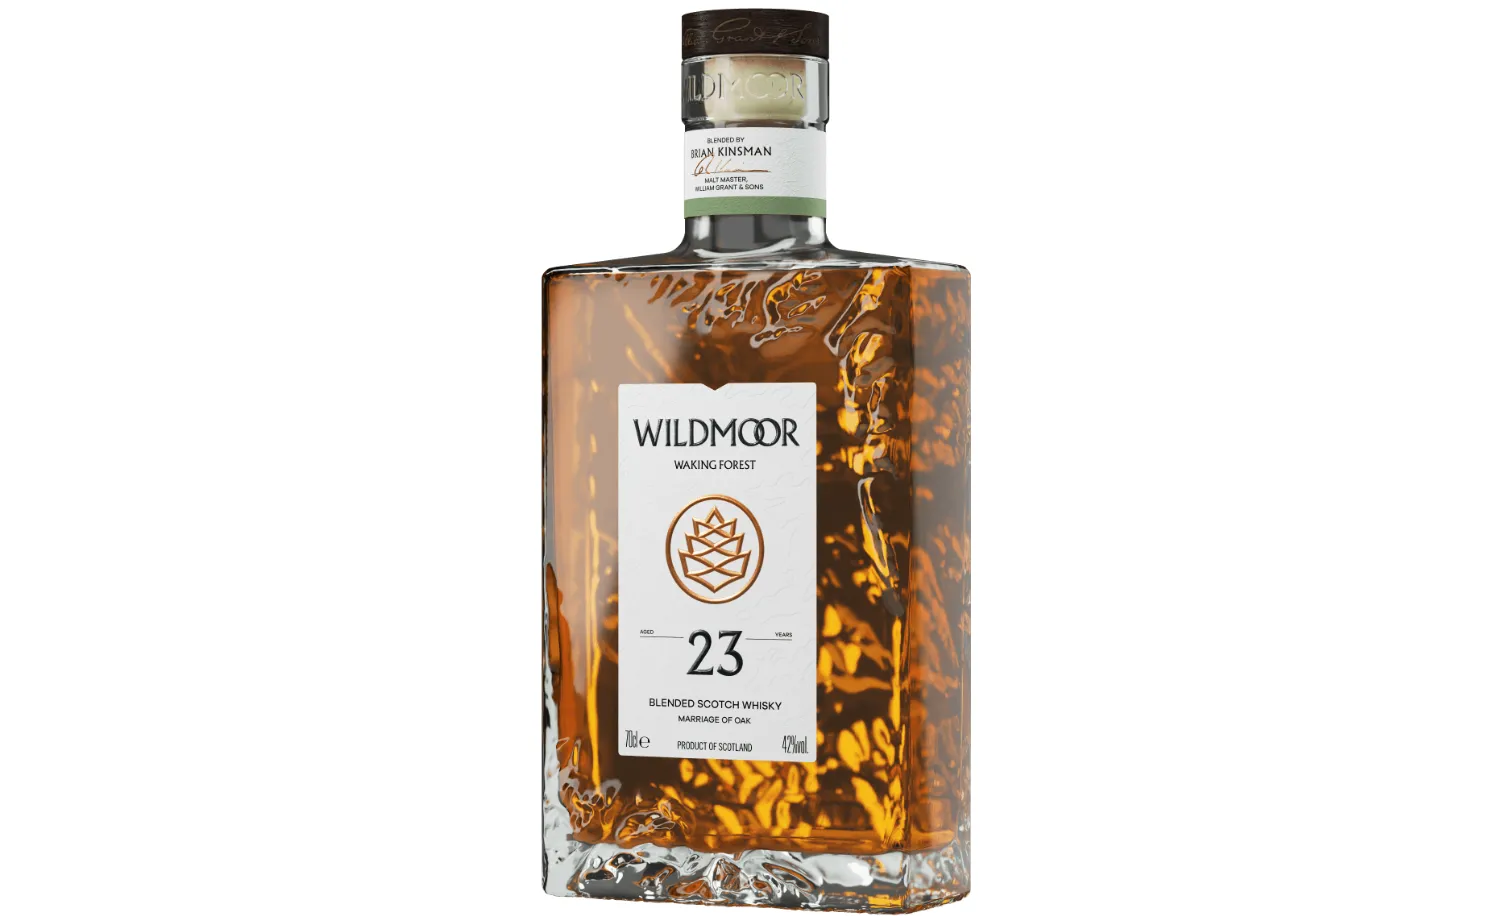 William Grant launches Wildmoor whisky collection